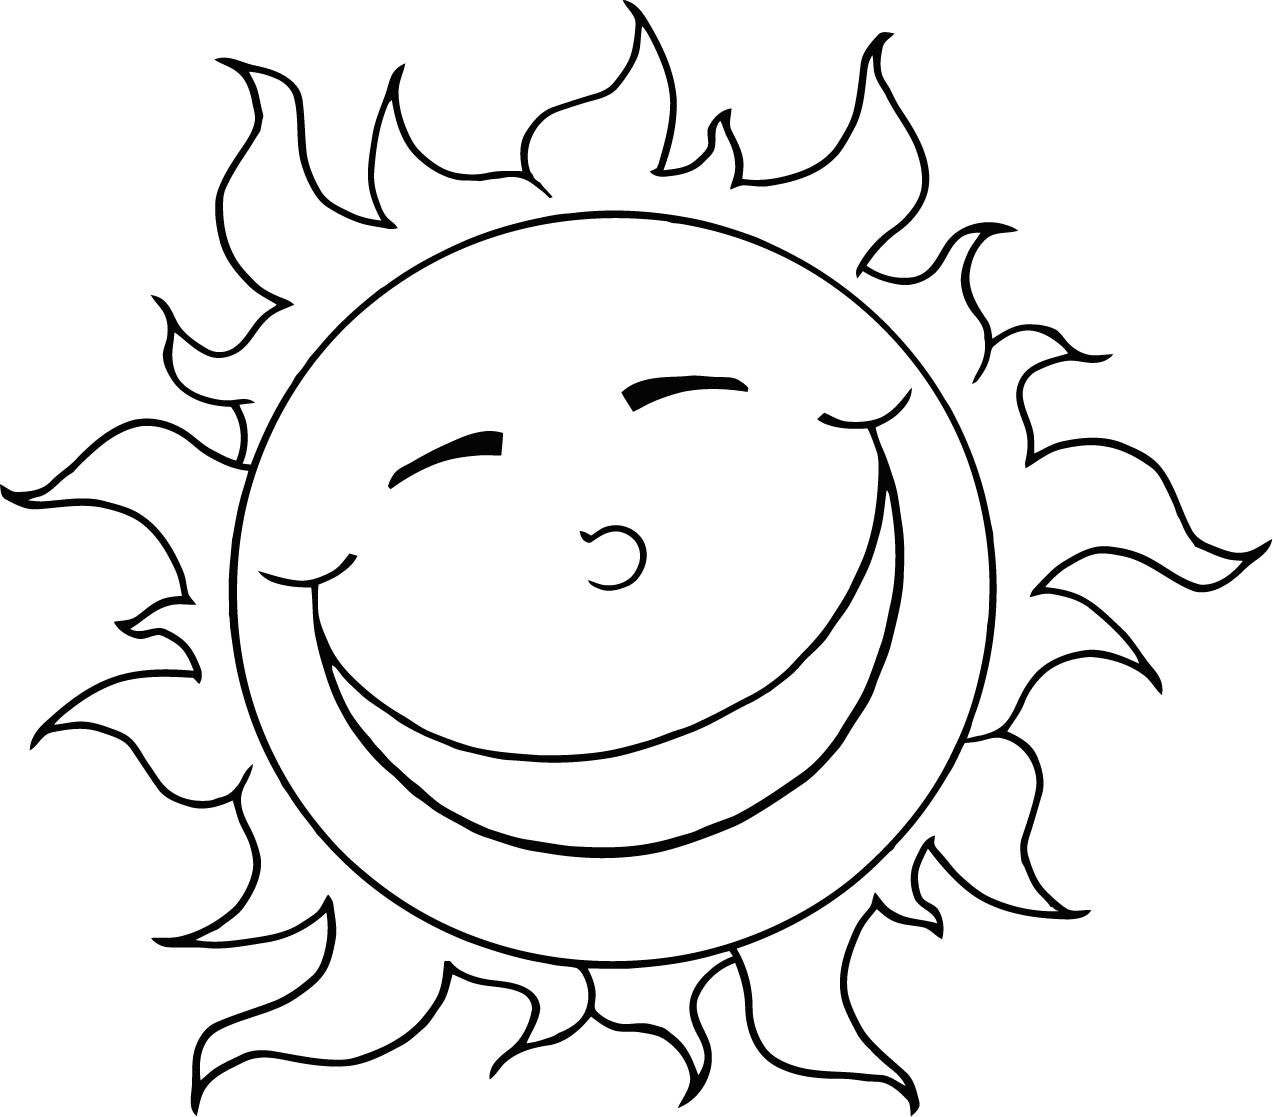 Coloring Pages Sun Free Printable Sun Coloring Pages For Kids